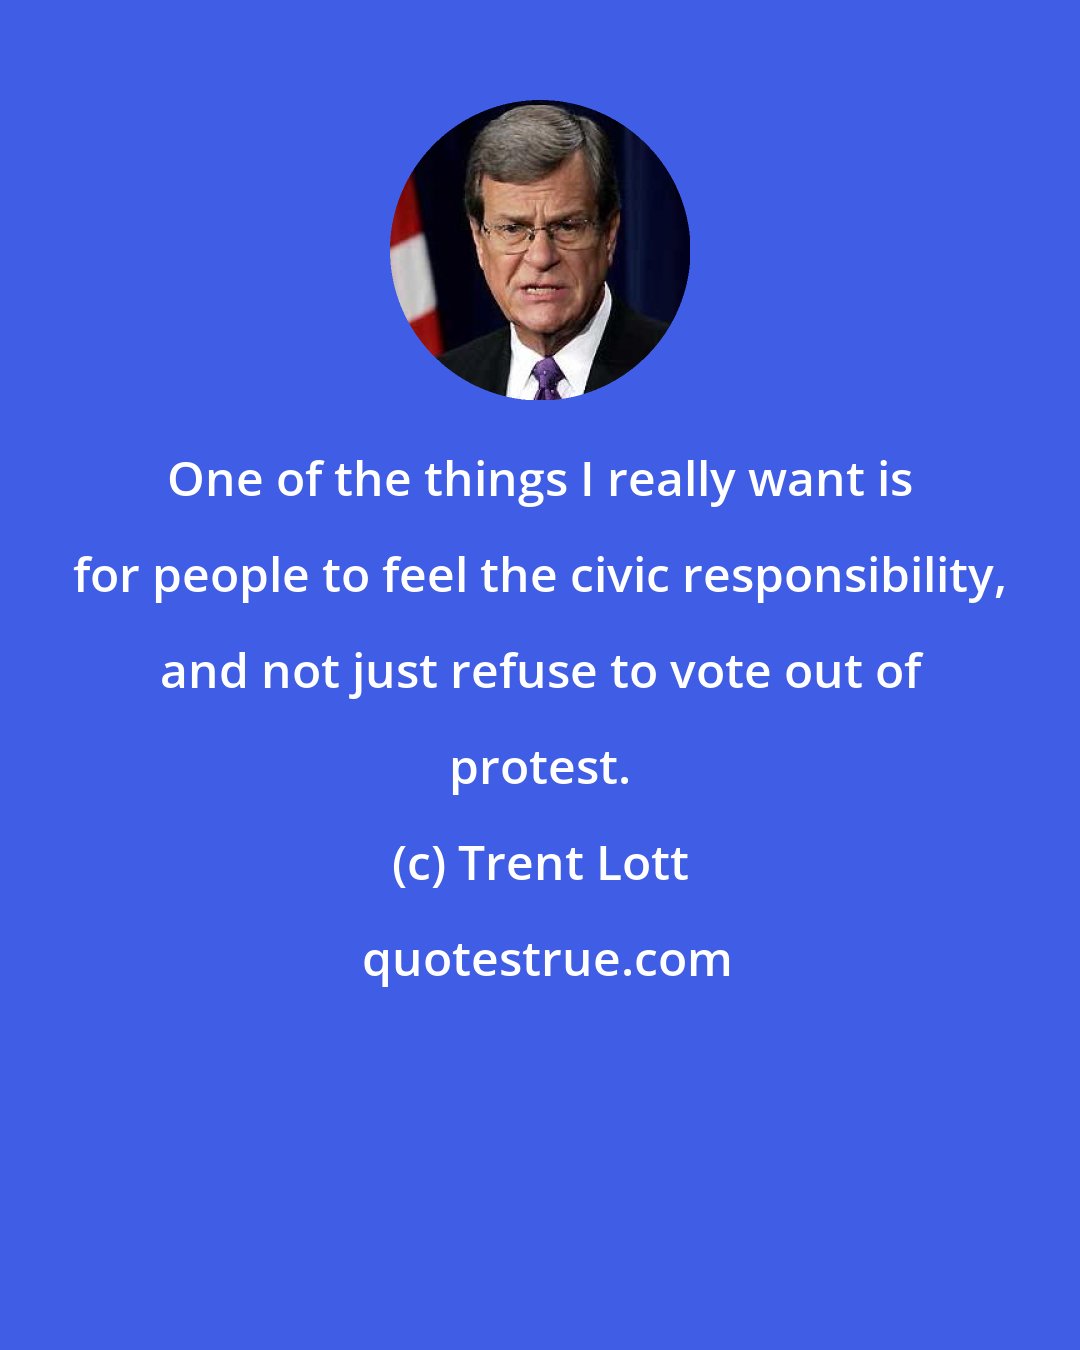 Trent Lott: One of the things I really want is for people to feel the civic responsibility, and not just refuse to vote out of protest.